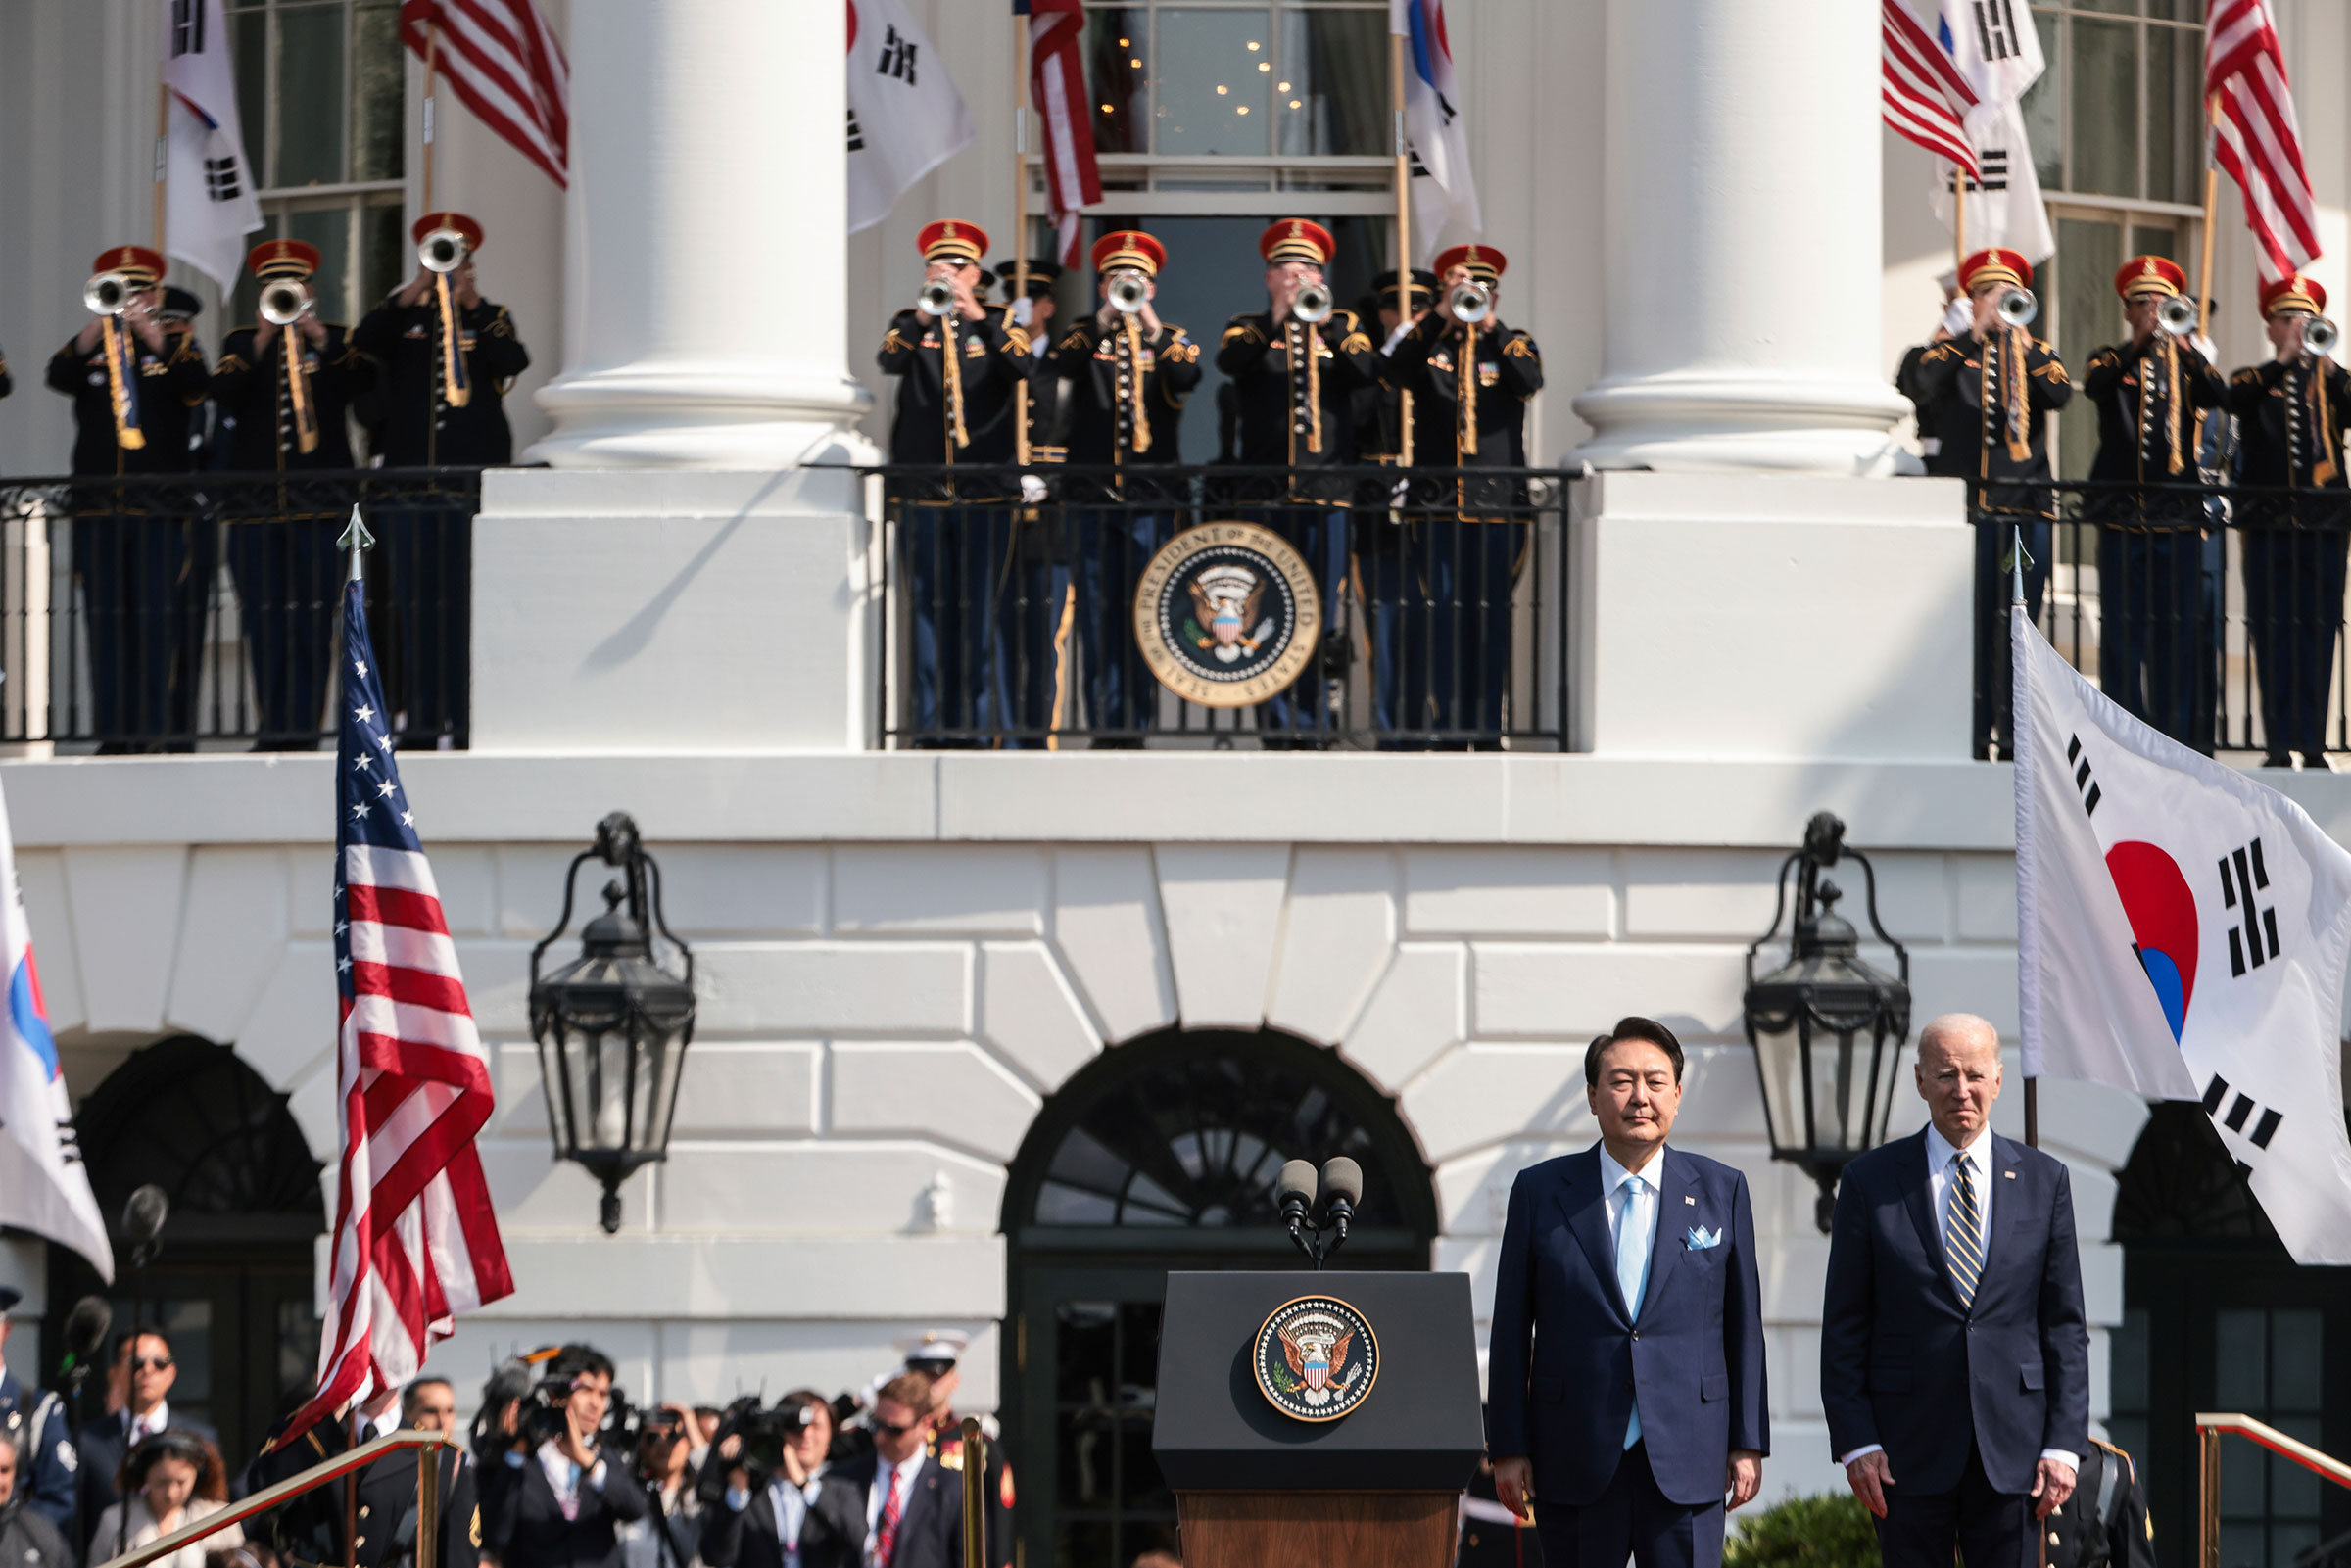 South Korea's President Yoon Suk Yeol stands with President Biden on the South Lawn of The White House in Washington, DC on April 26, 2023. (Oliver Contreras—Sipa USA/AP)